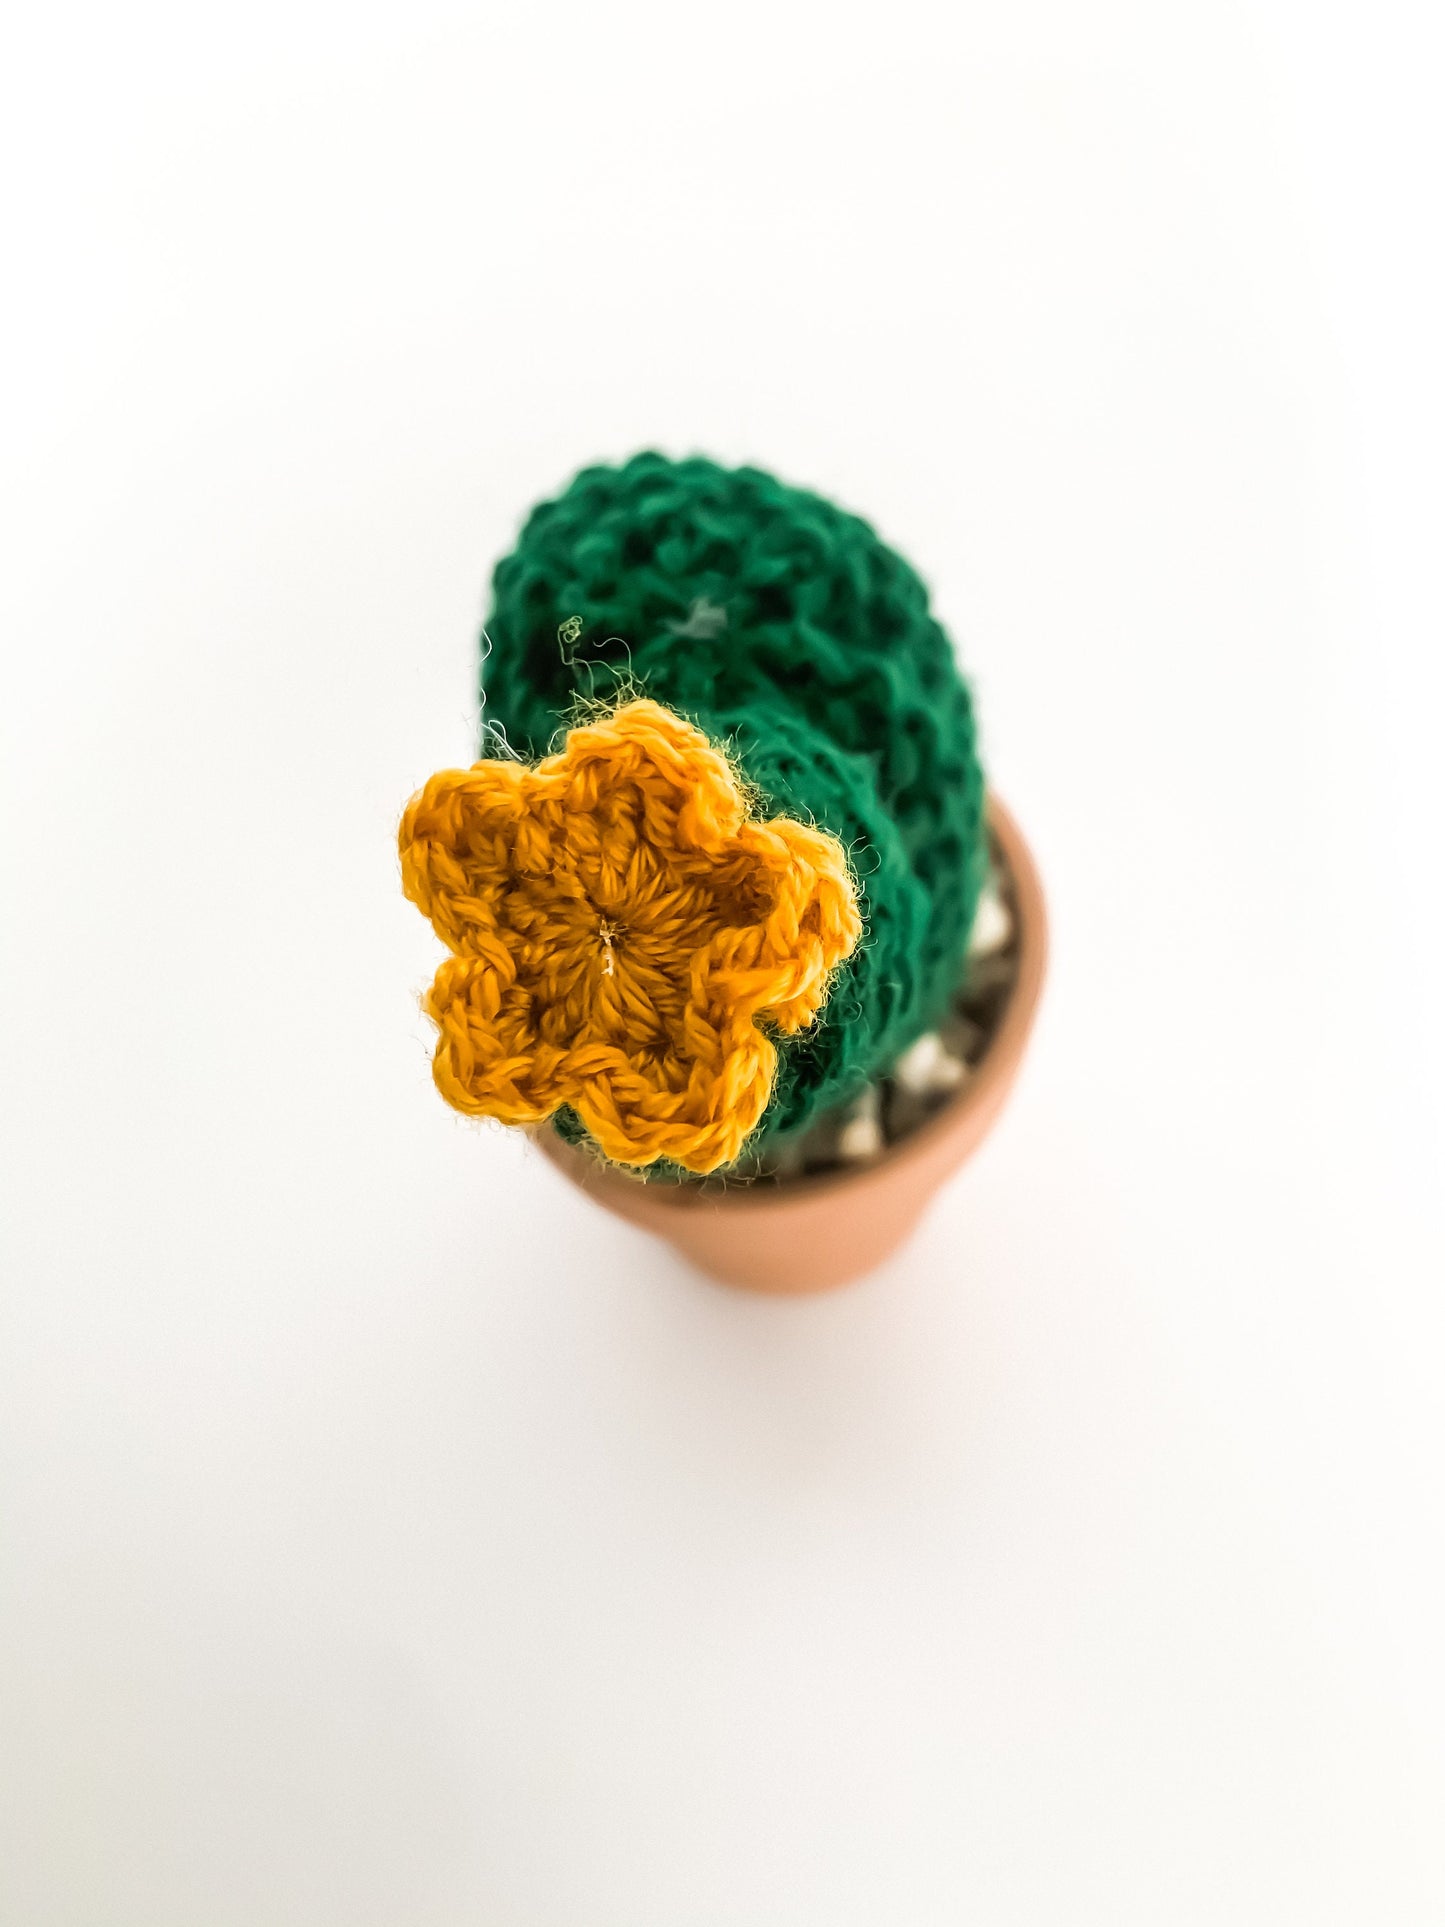 Knit Cactus // Prickly Pear, Knit Cactus Plant with Yellow Flower Planted in Terracotta Pot // Boho Home Decor// Home Office Decor